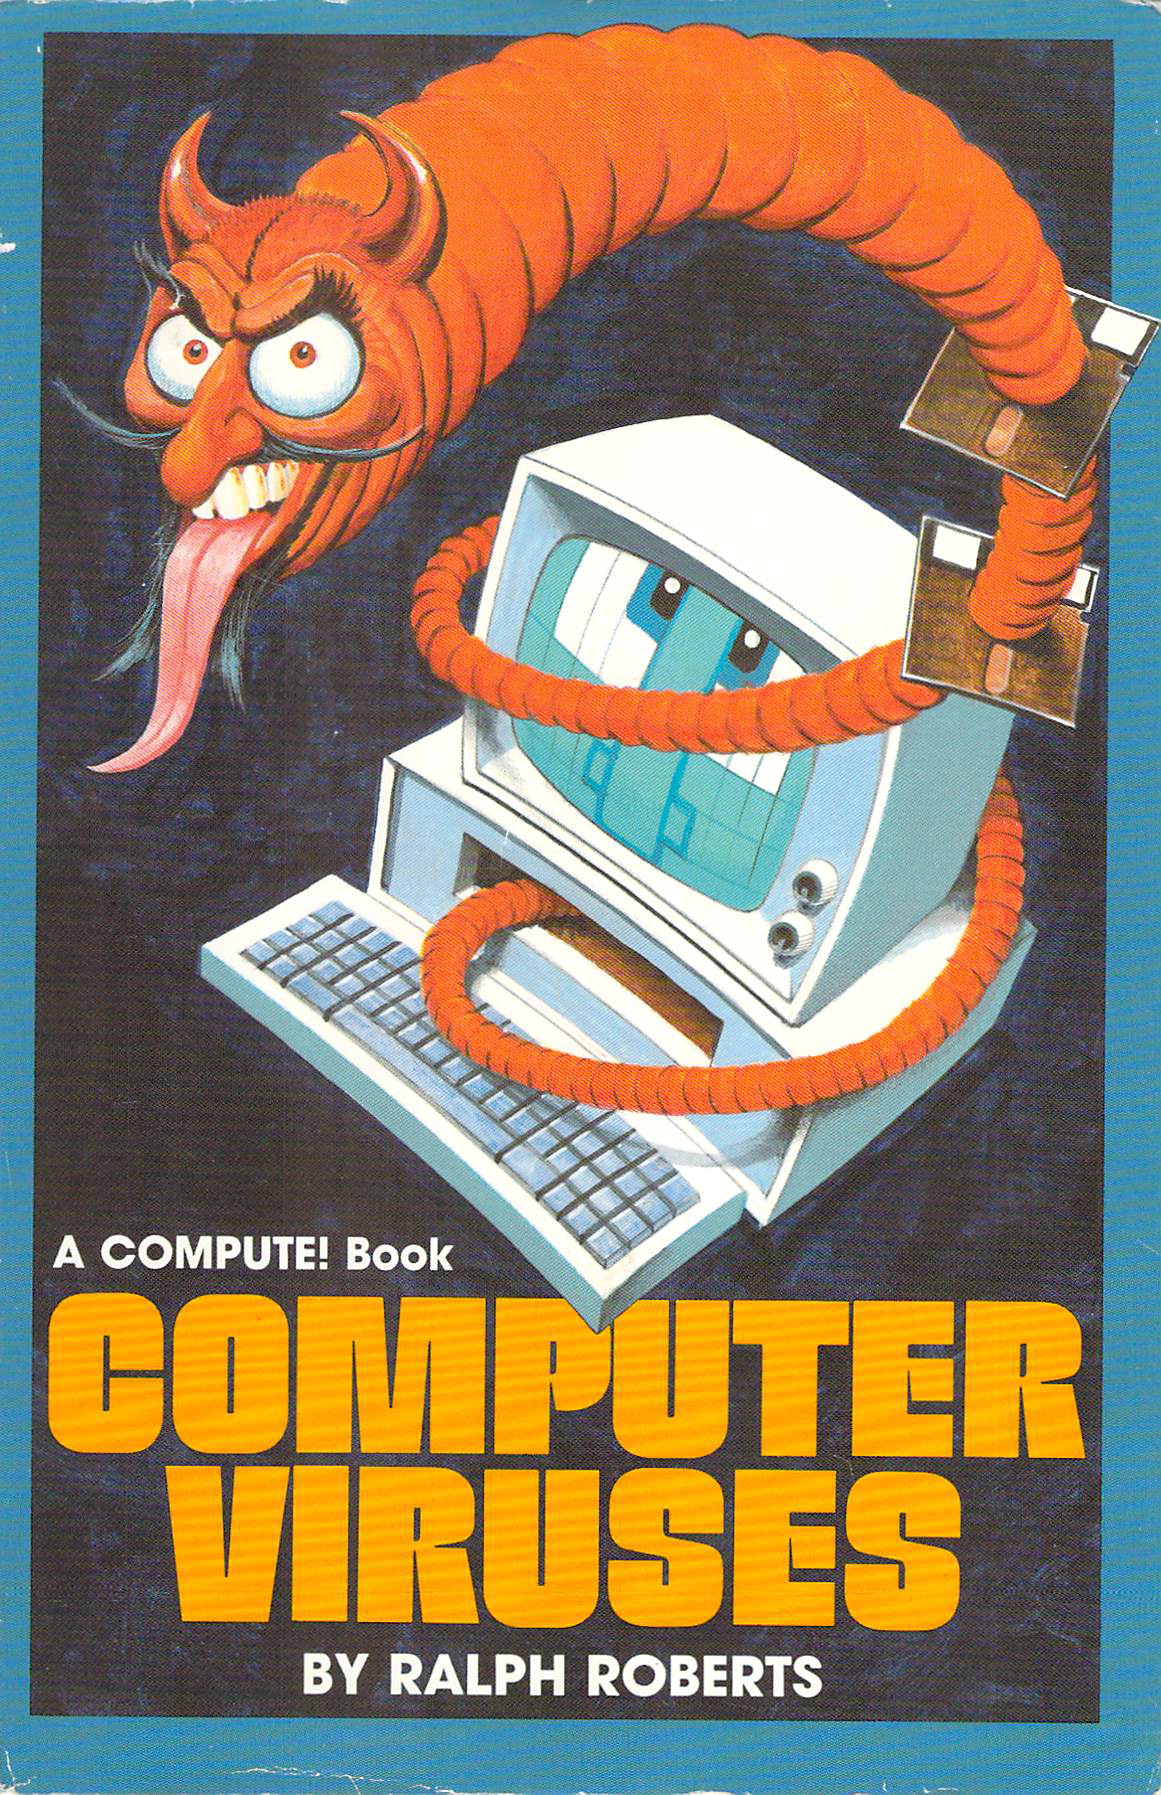 COMPUTE!'s computer viruses (book cover)